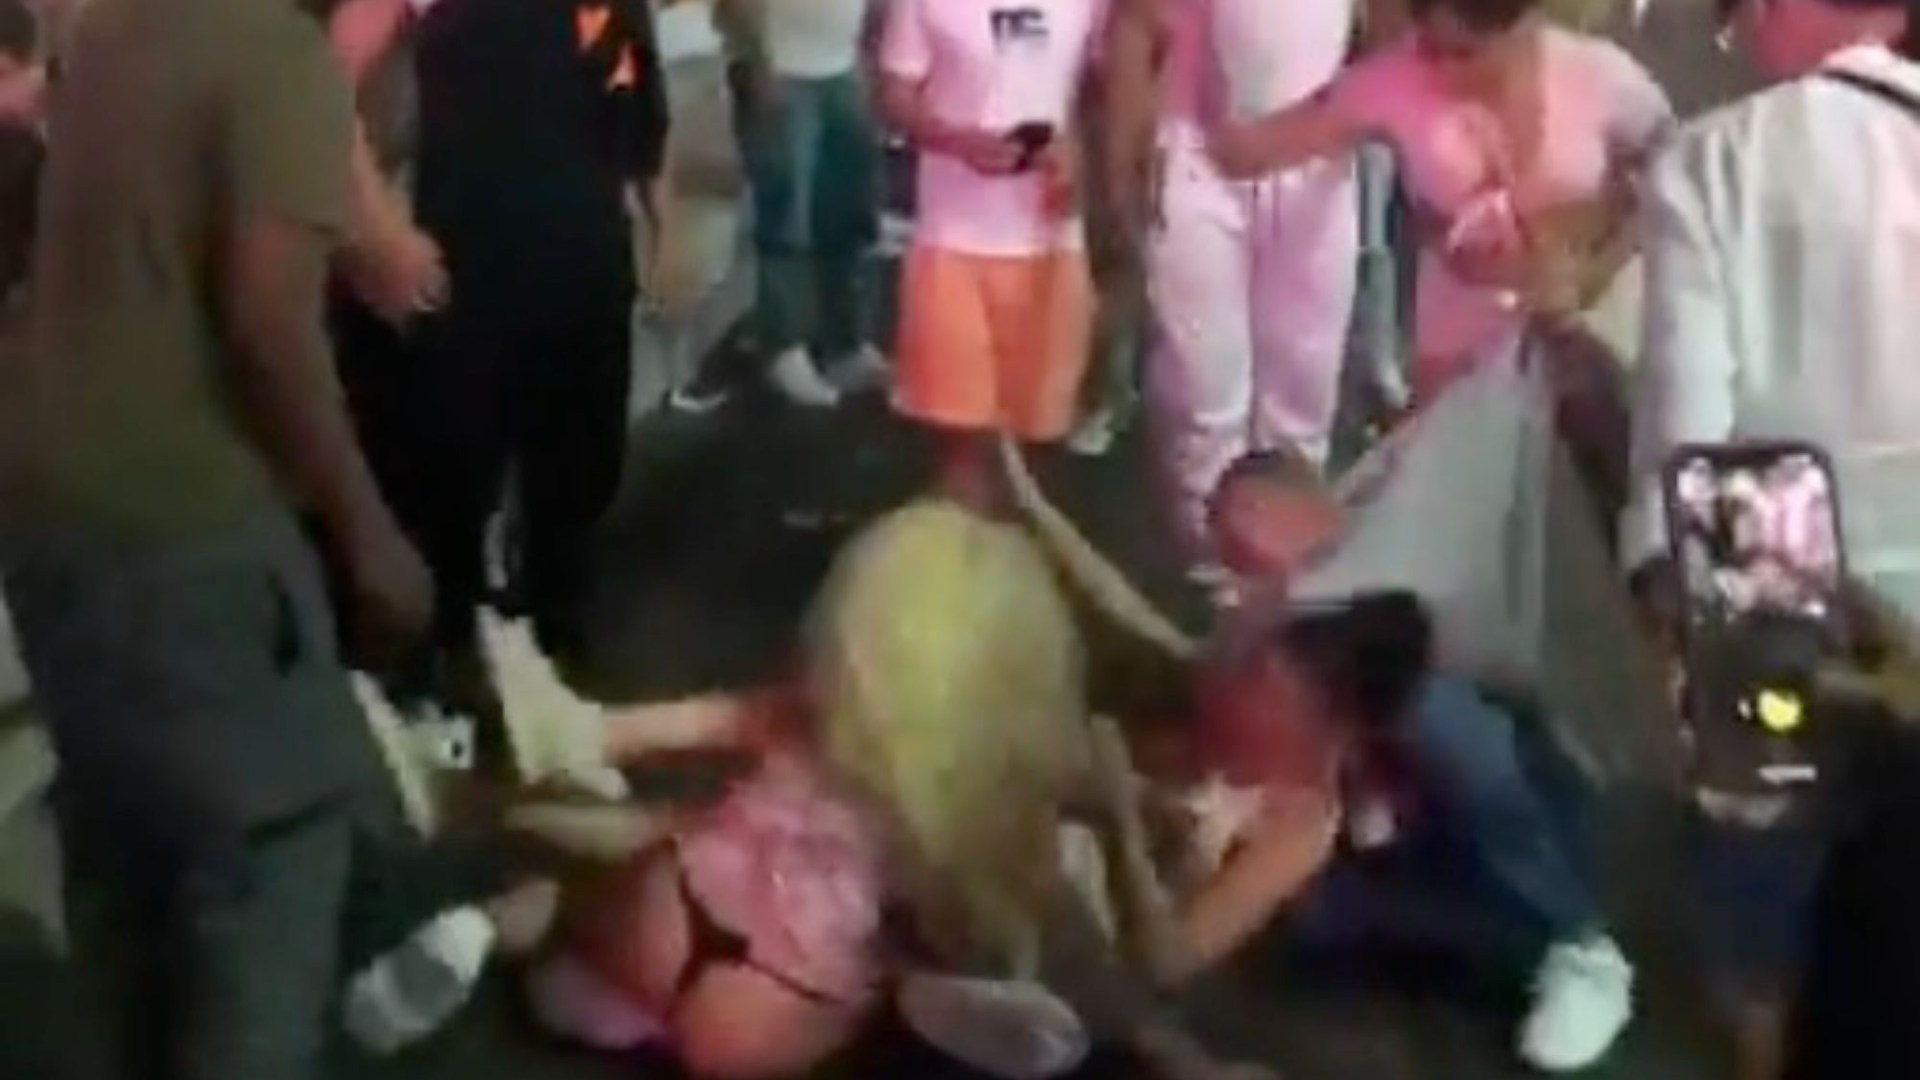 Shock moment half-naked women violently brawl outside McDonald’s as one is kneed three times forcing security to step in